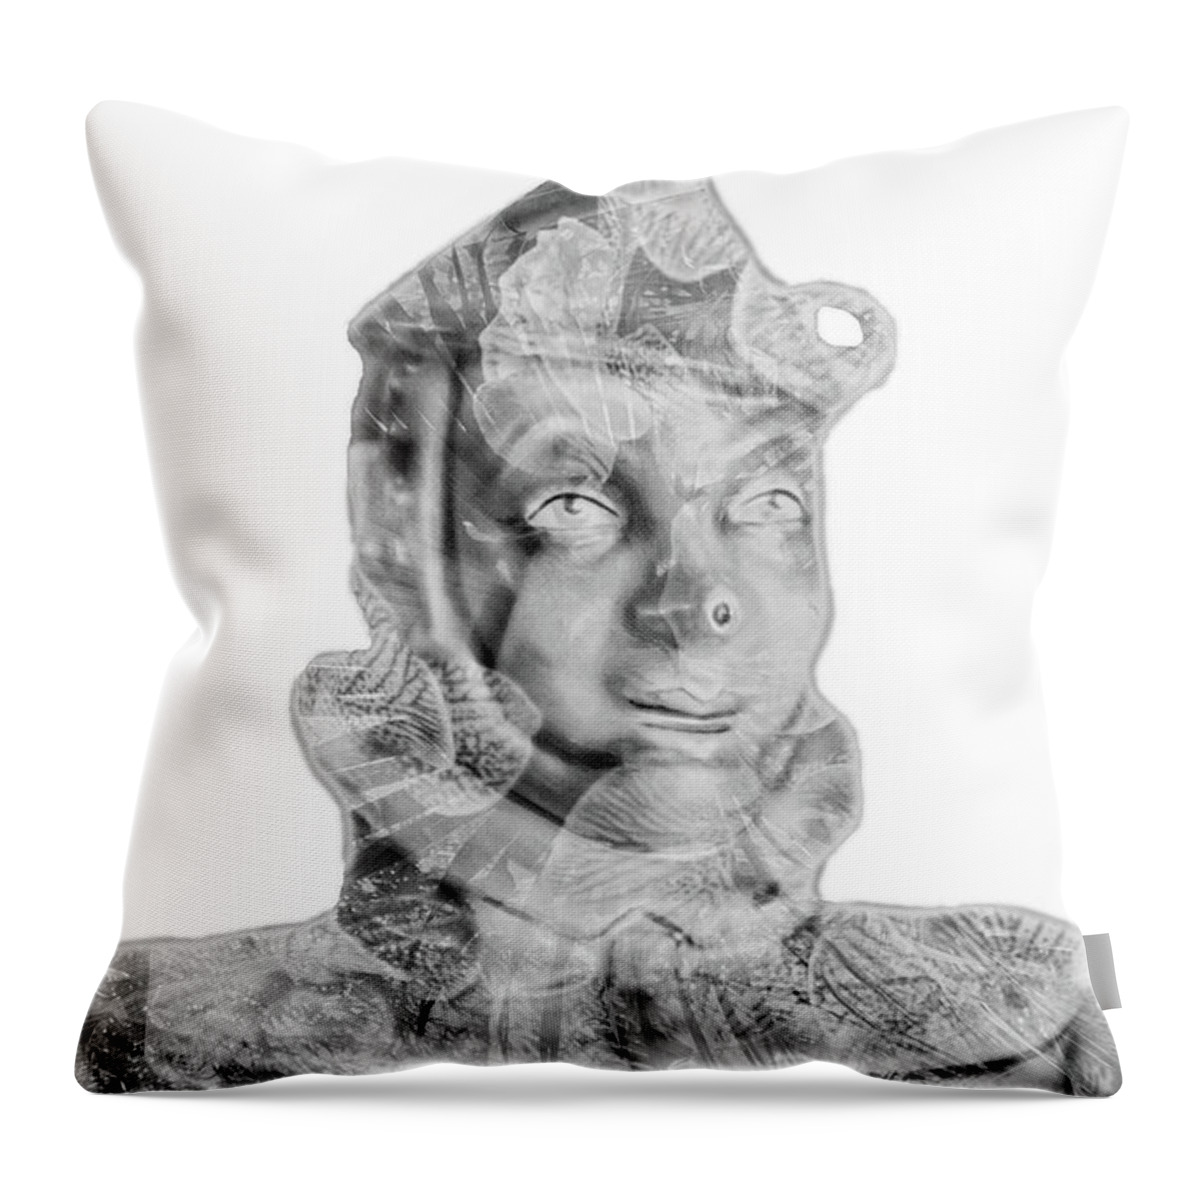 Whimsical Throw Pillow featuring the photograph Mr Tin by Pamela Williams